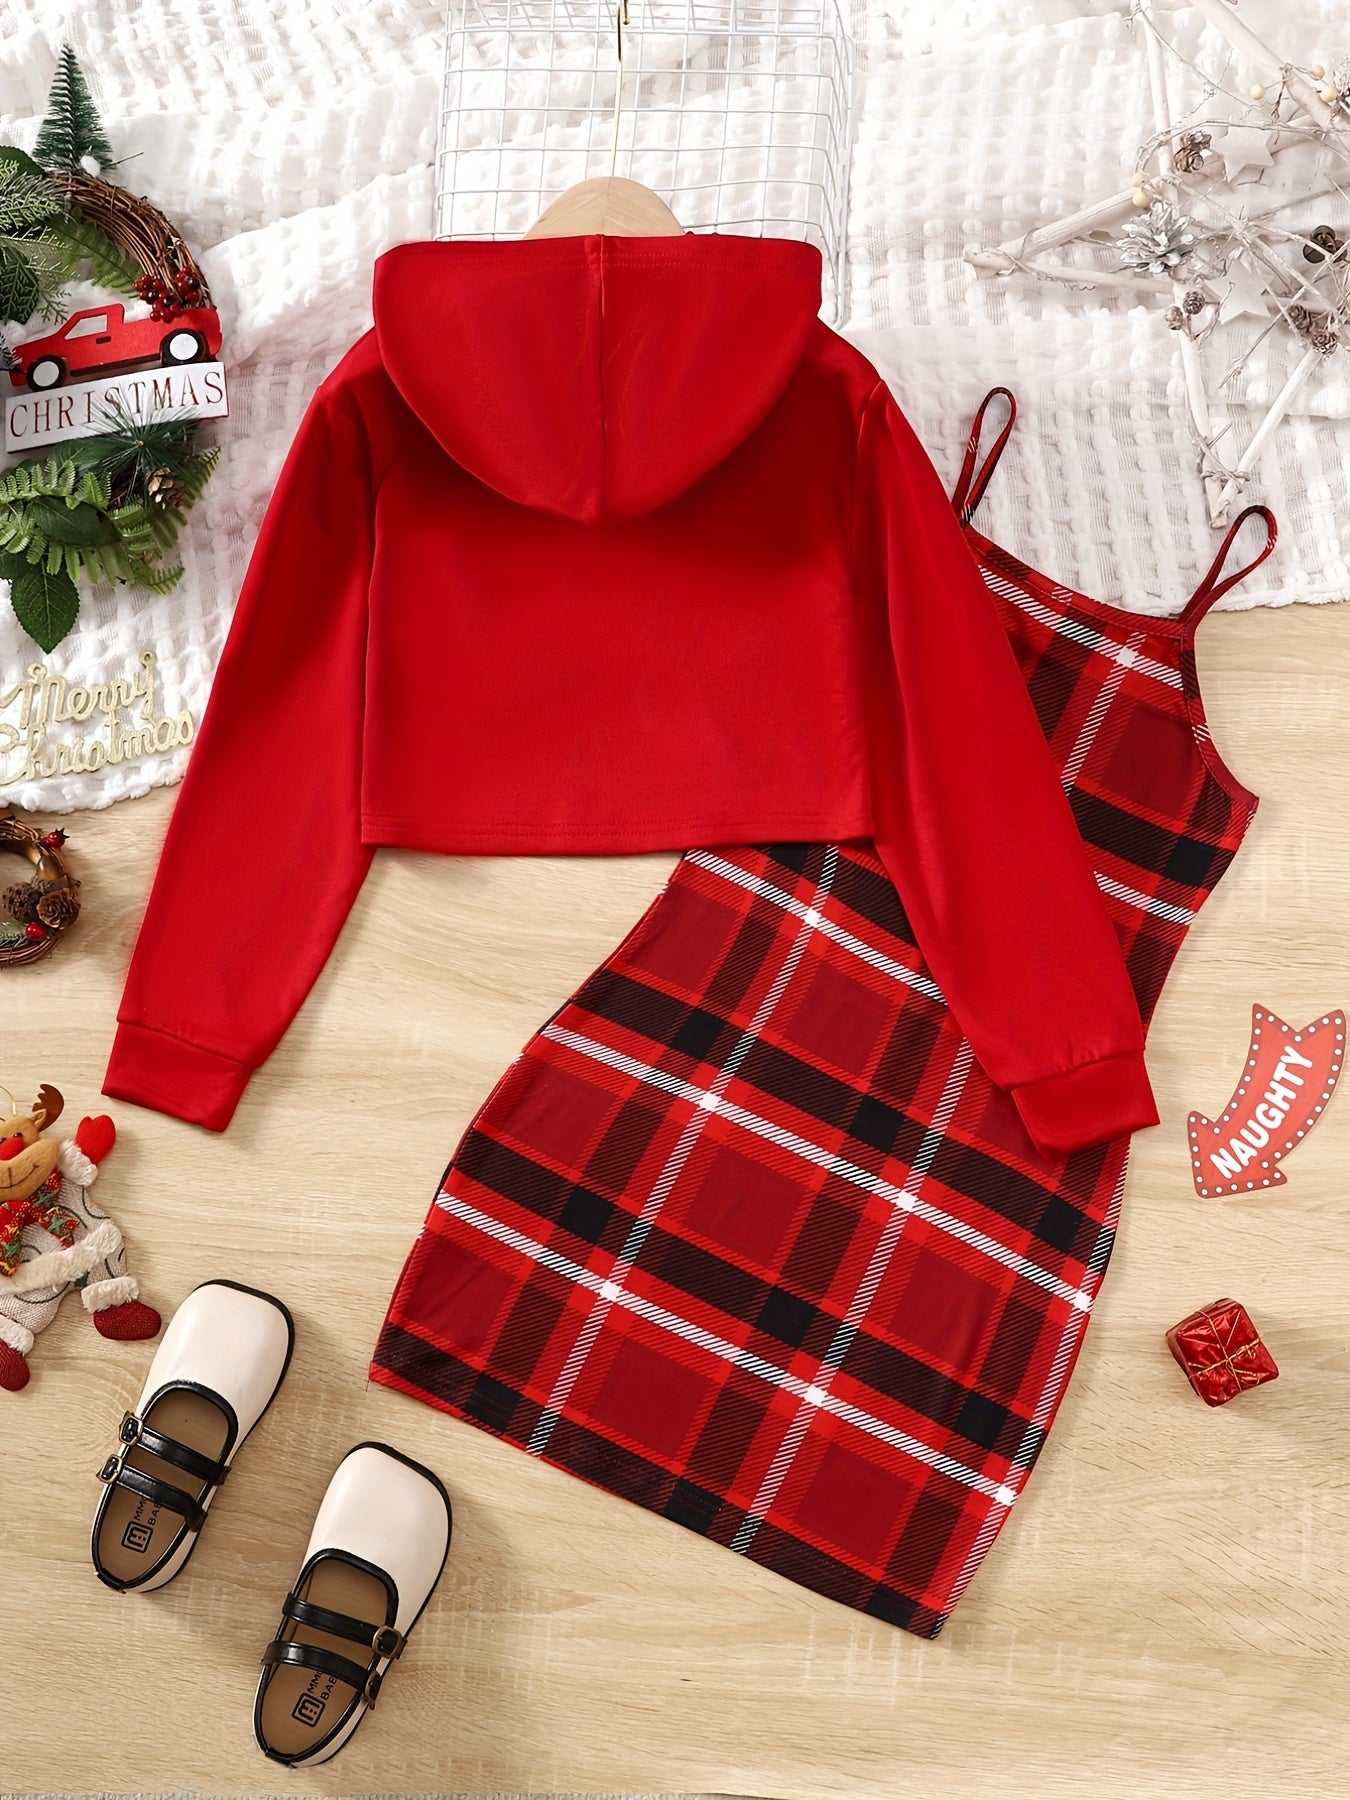 2pcs Girl's Trendy Christmas Outfit, Hoodie & Plaid Pattern Sundress Set, MERRY CHRISTMAS Print Kid's Clothes For Spring Autumn